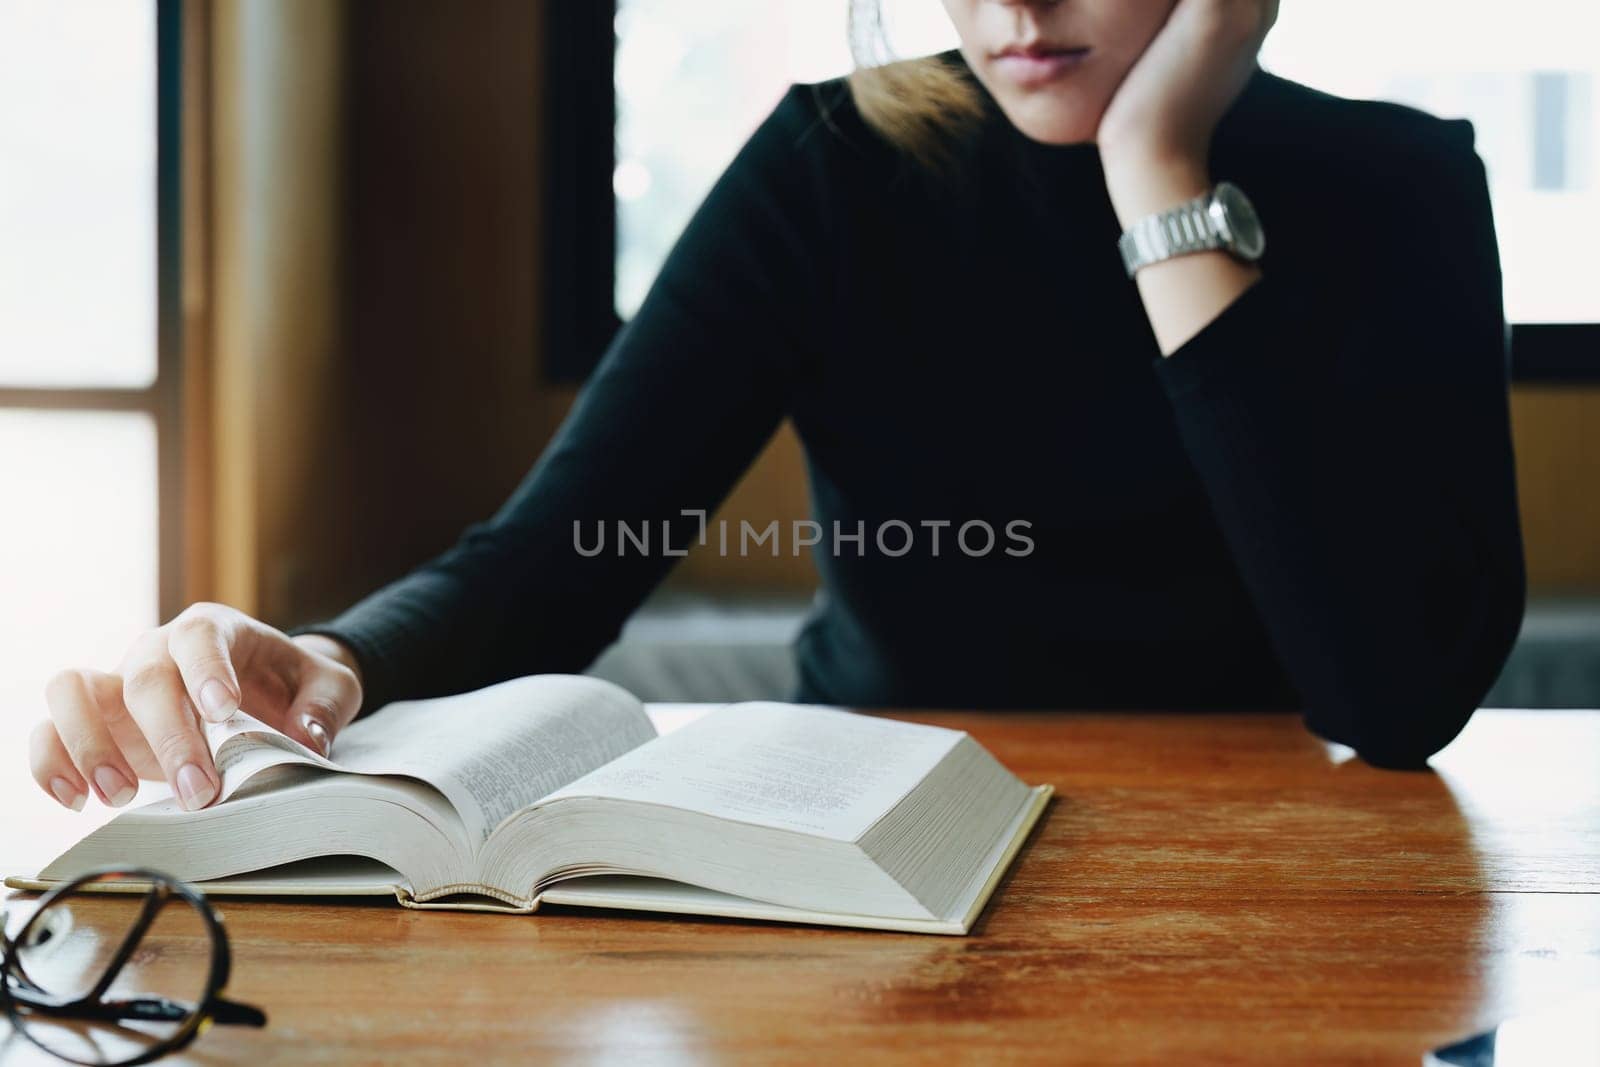 A portrait of a young Asian woman reading textbooks shows boredom on a wooden desk in library by Manastrong